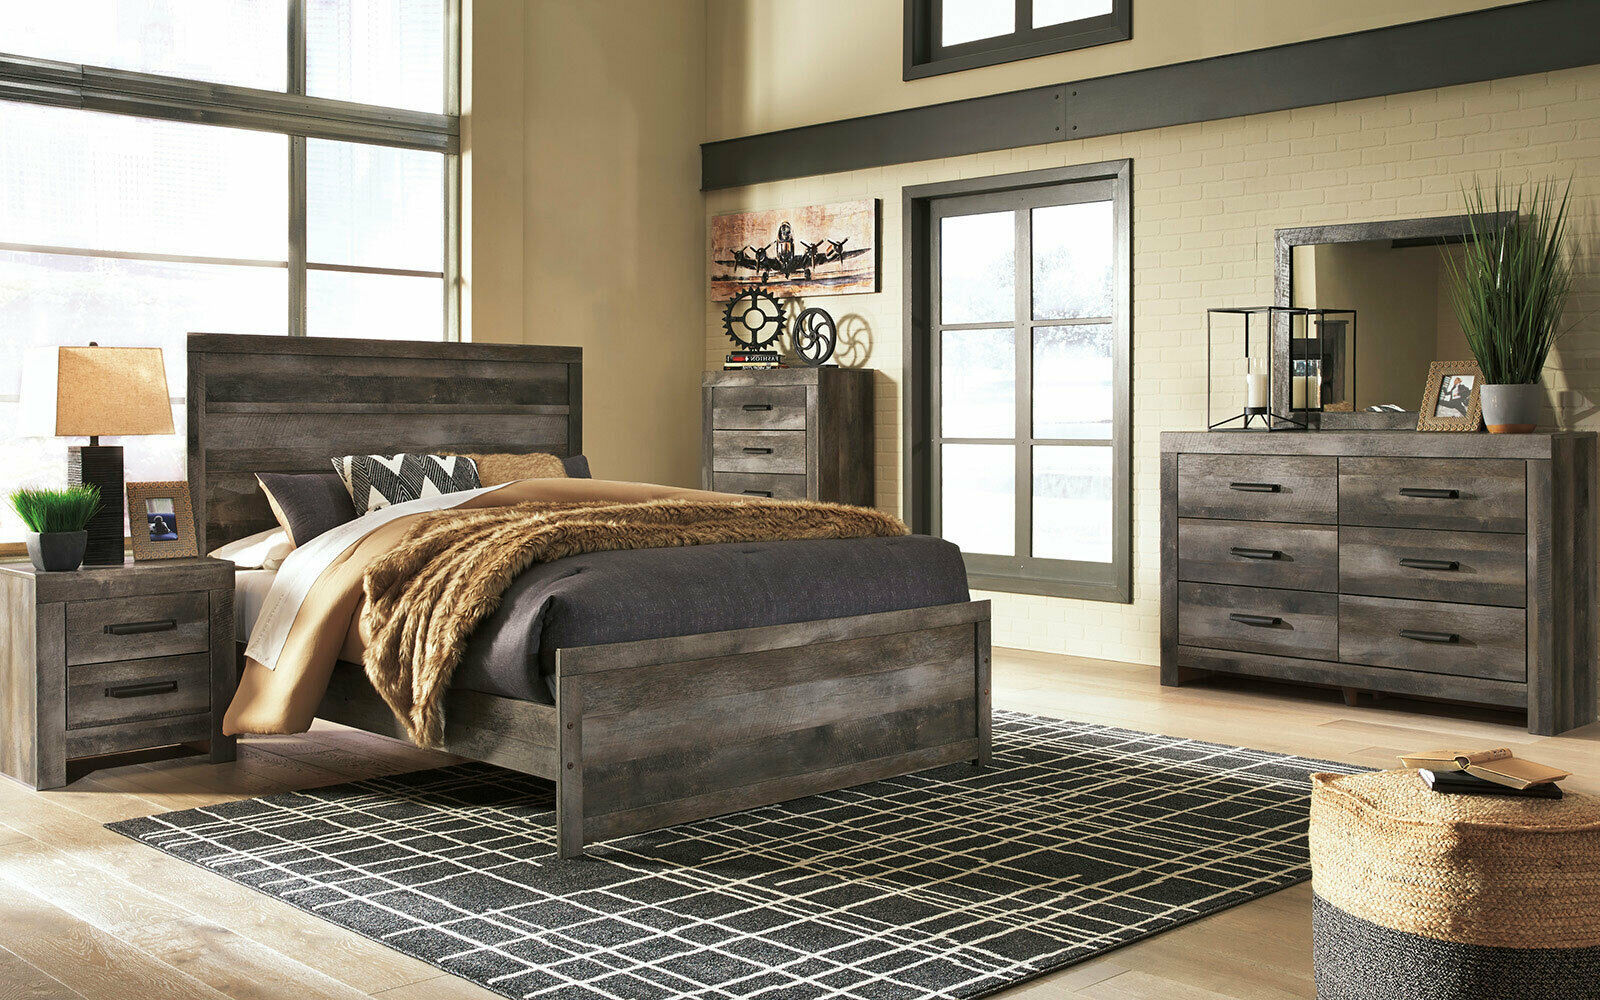 bedroom color schemes with gray rustic furniture